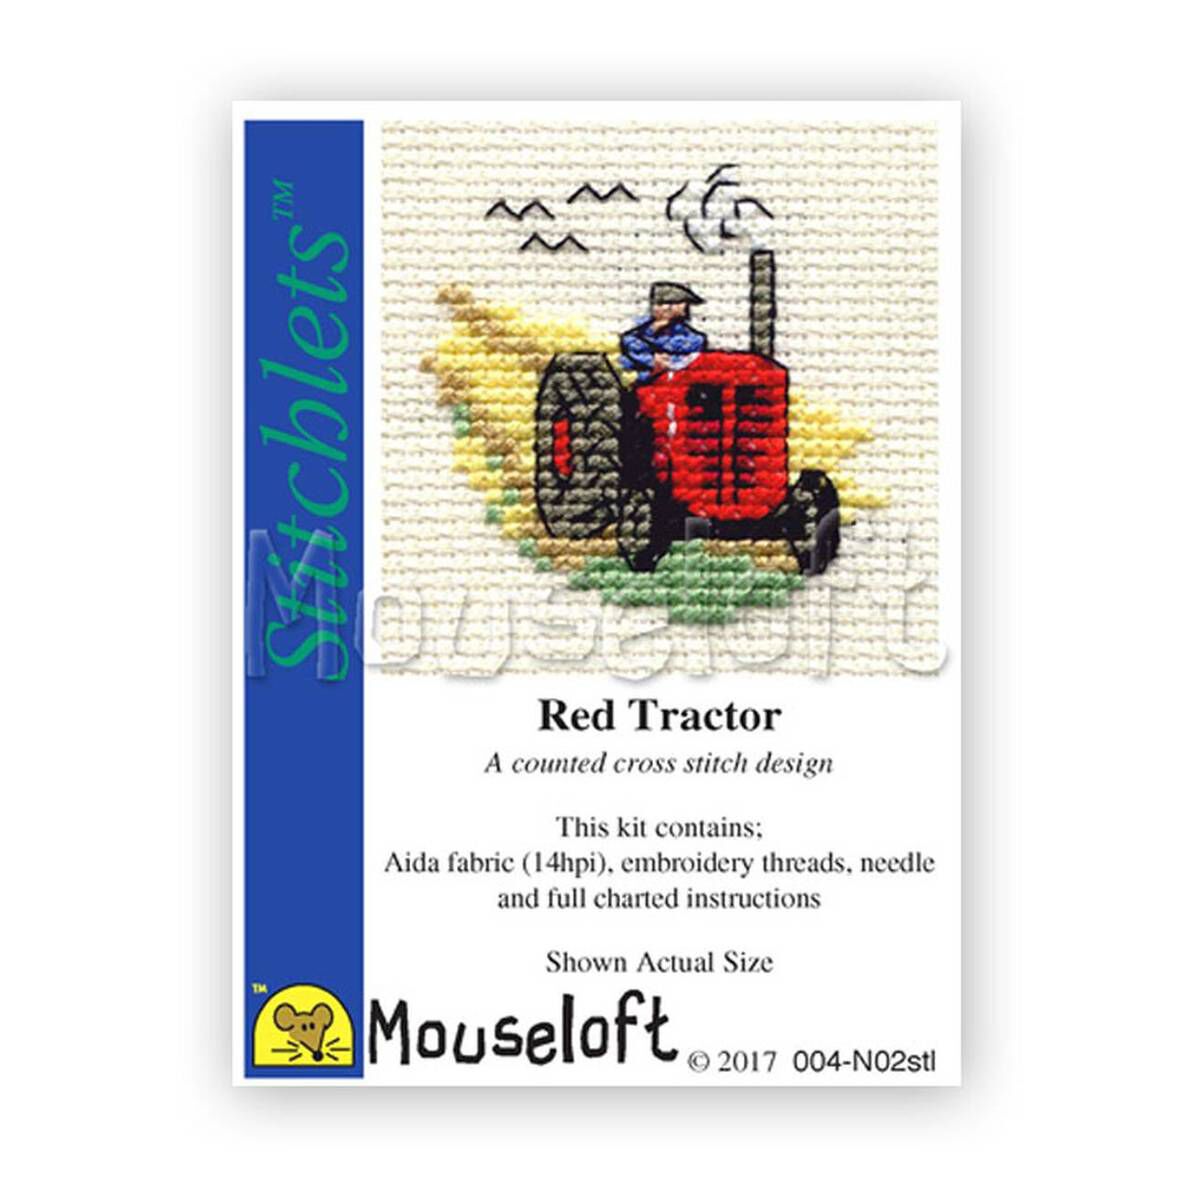 Red Tractor Stitchlets Collection Mouseloft Mini Cross Stitch Kit 